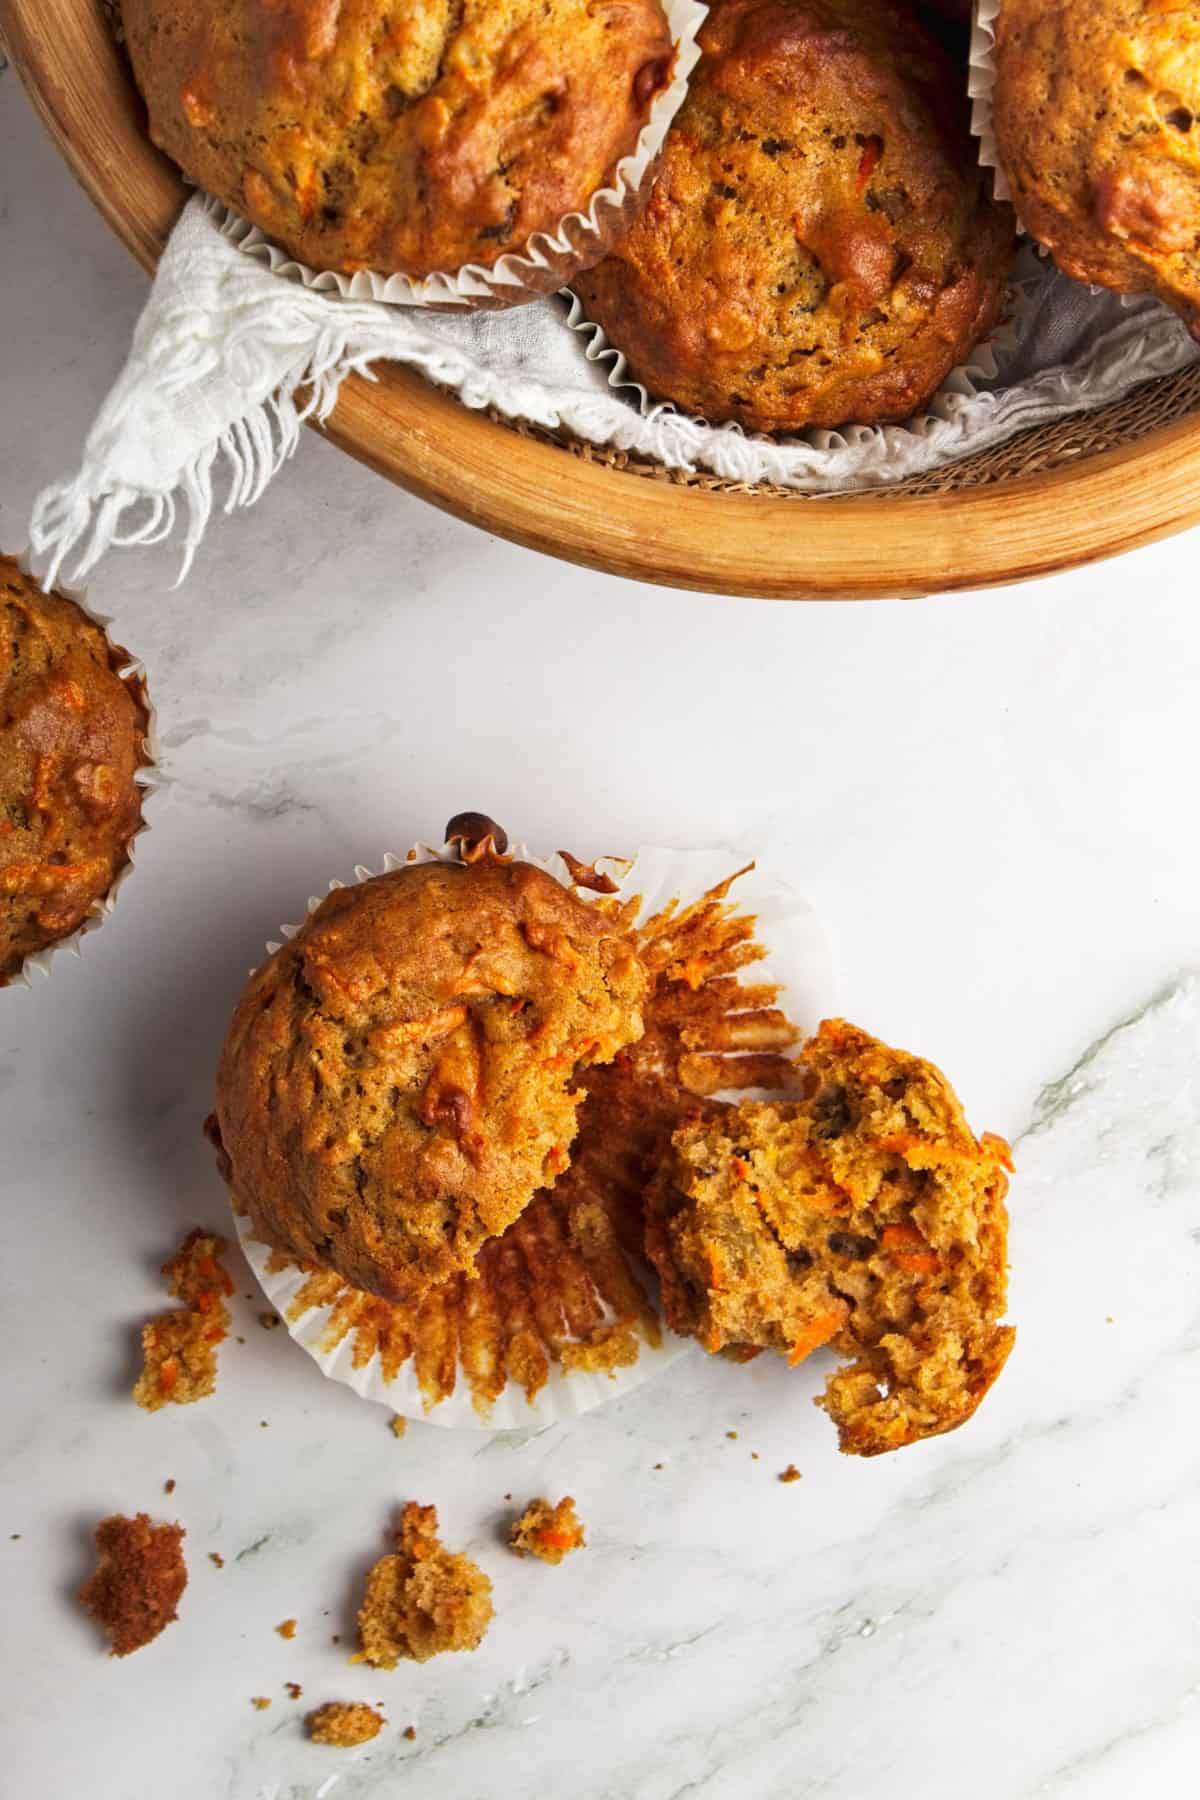 A single oatmeal carrot muffin pulled apart on a marble tabletop.